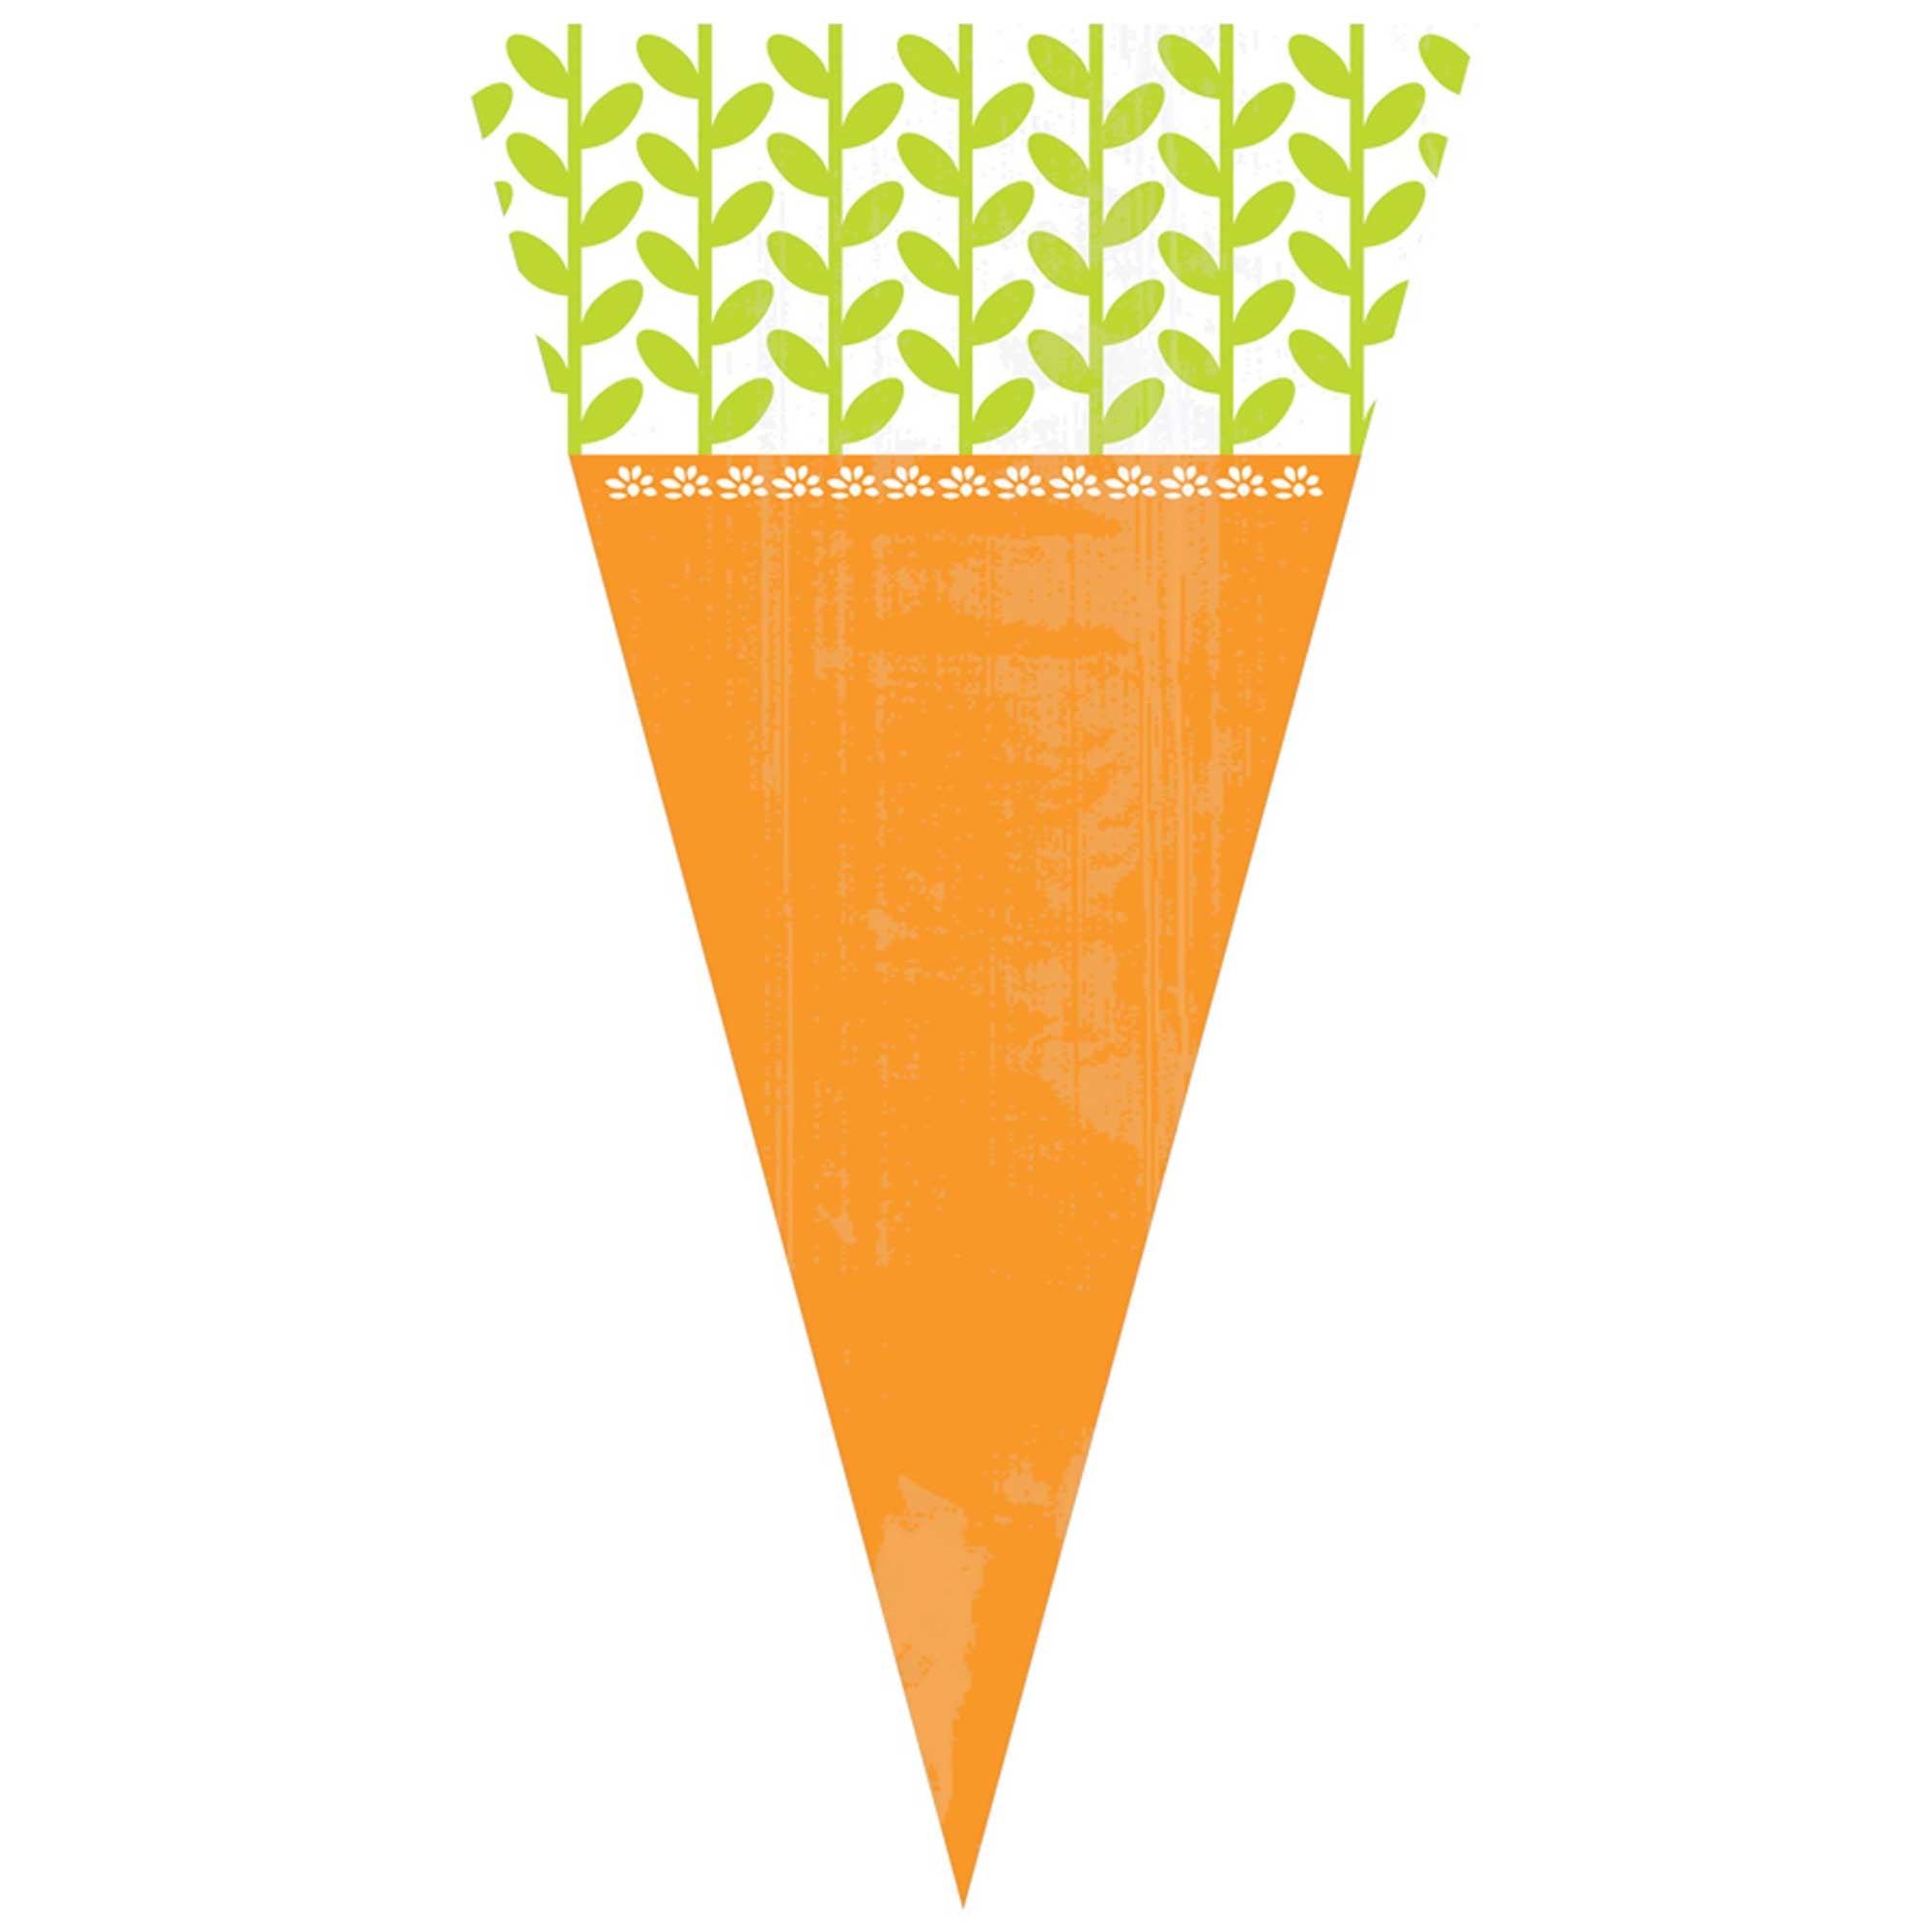 cellophane Easter treat bags that look like carrots